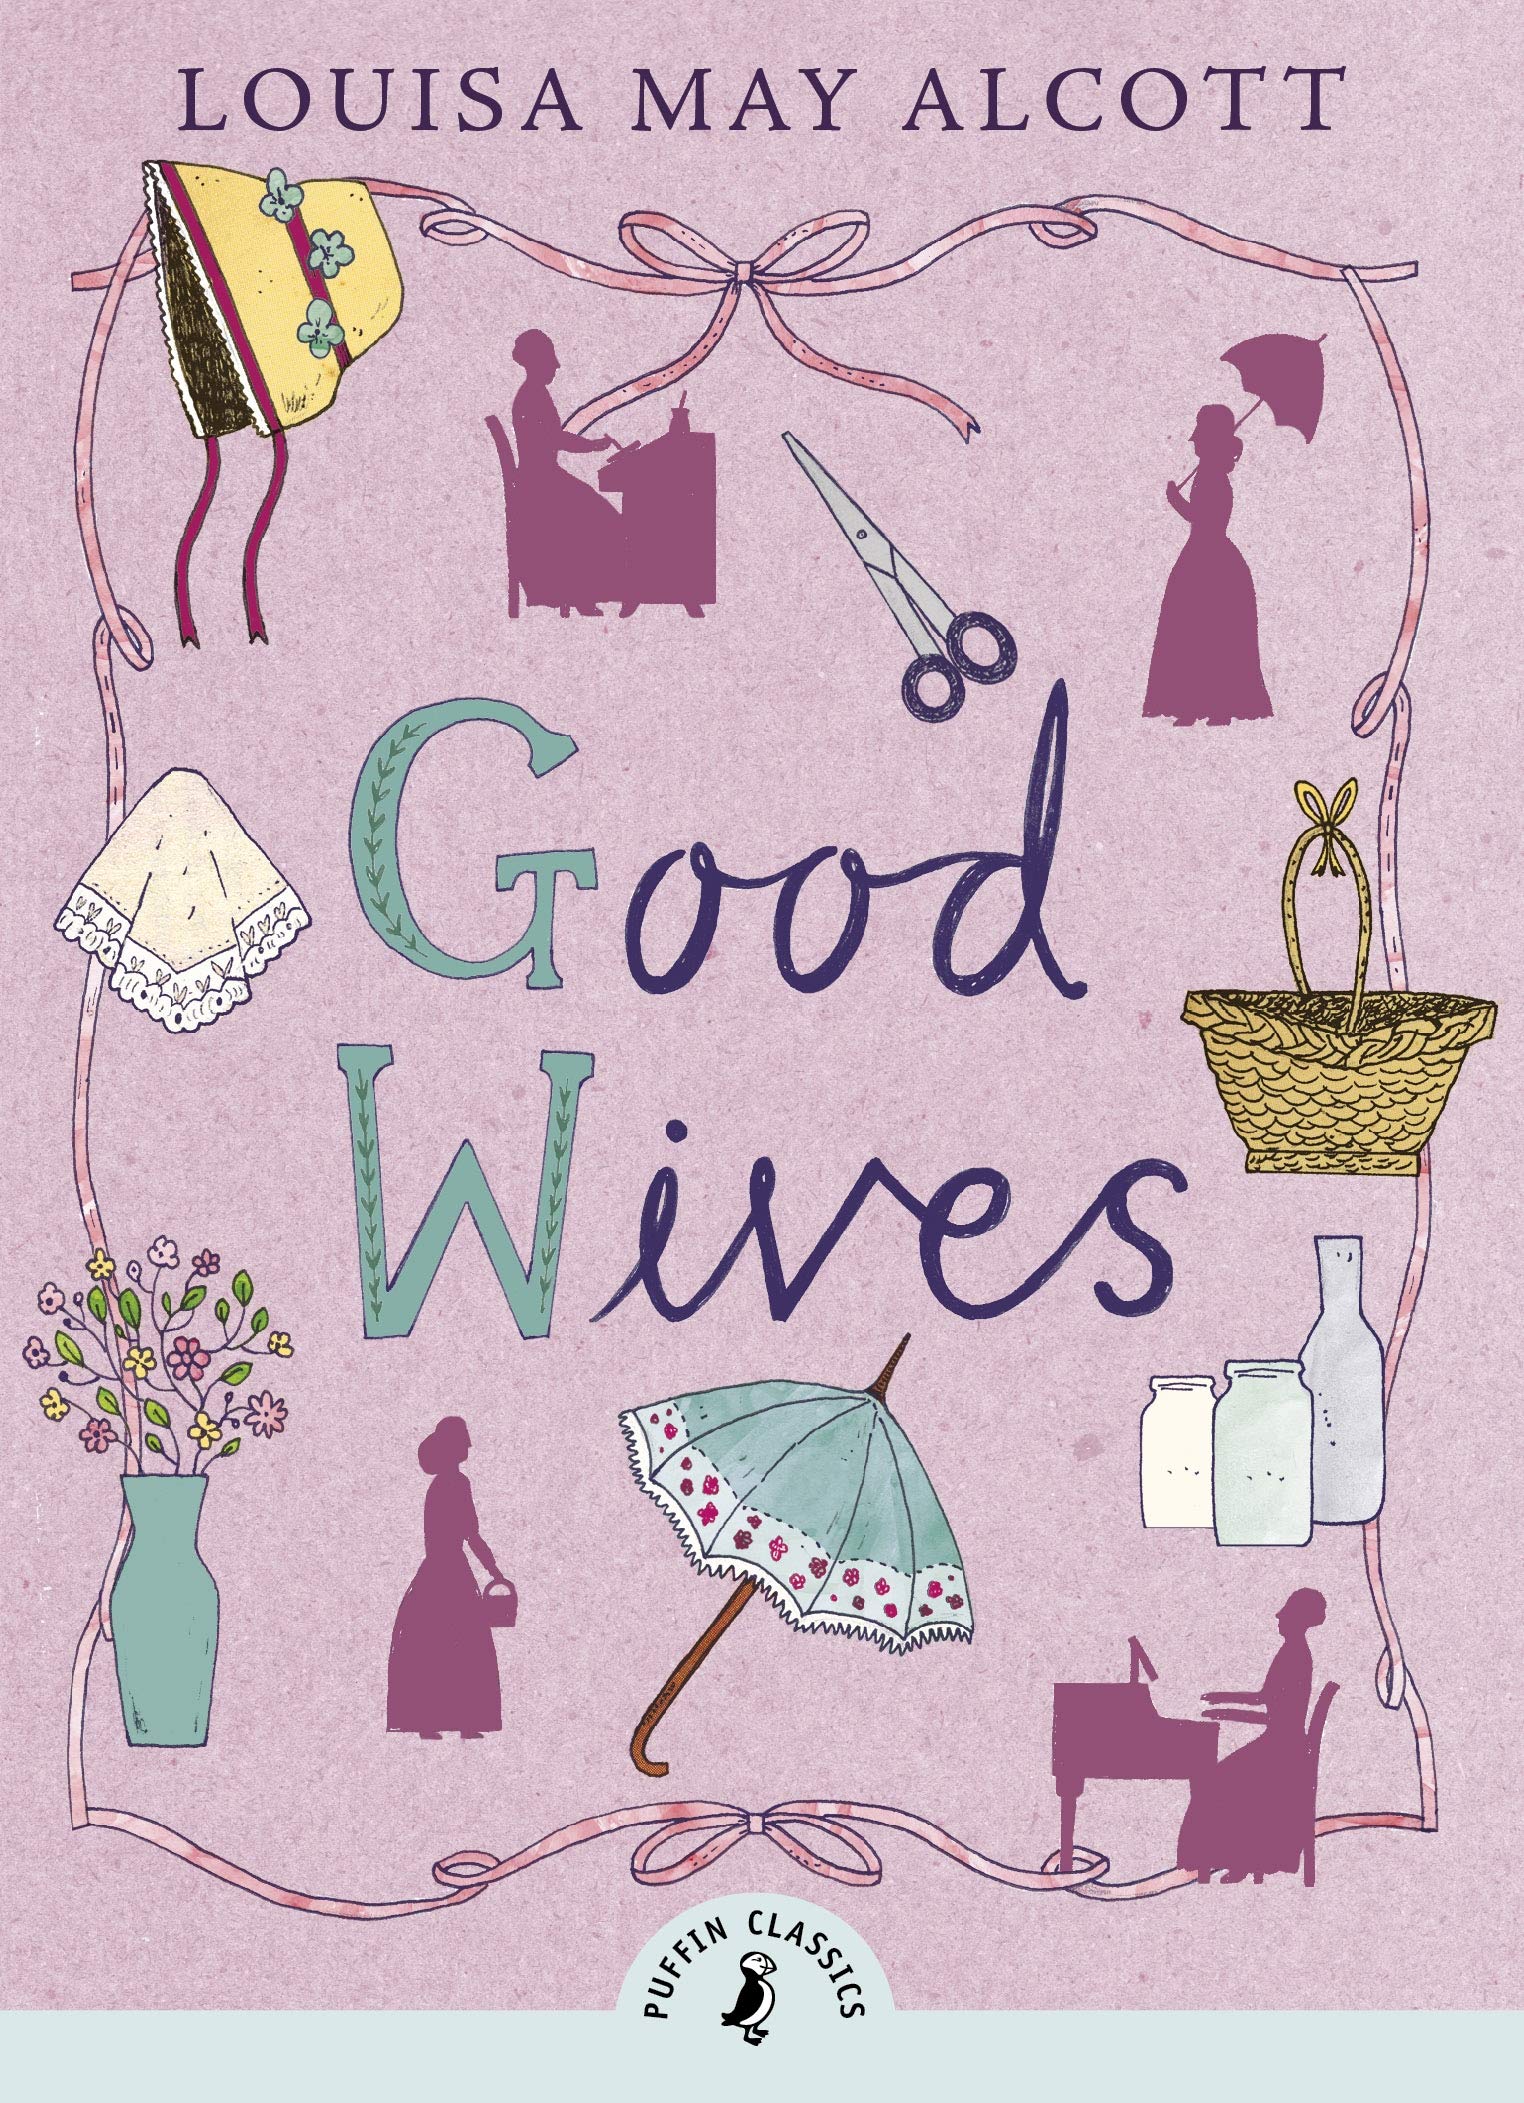 Publisher:Puffin Books - Good Wives - Louisa May Alcott